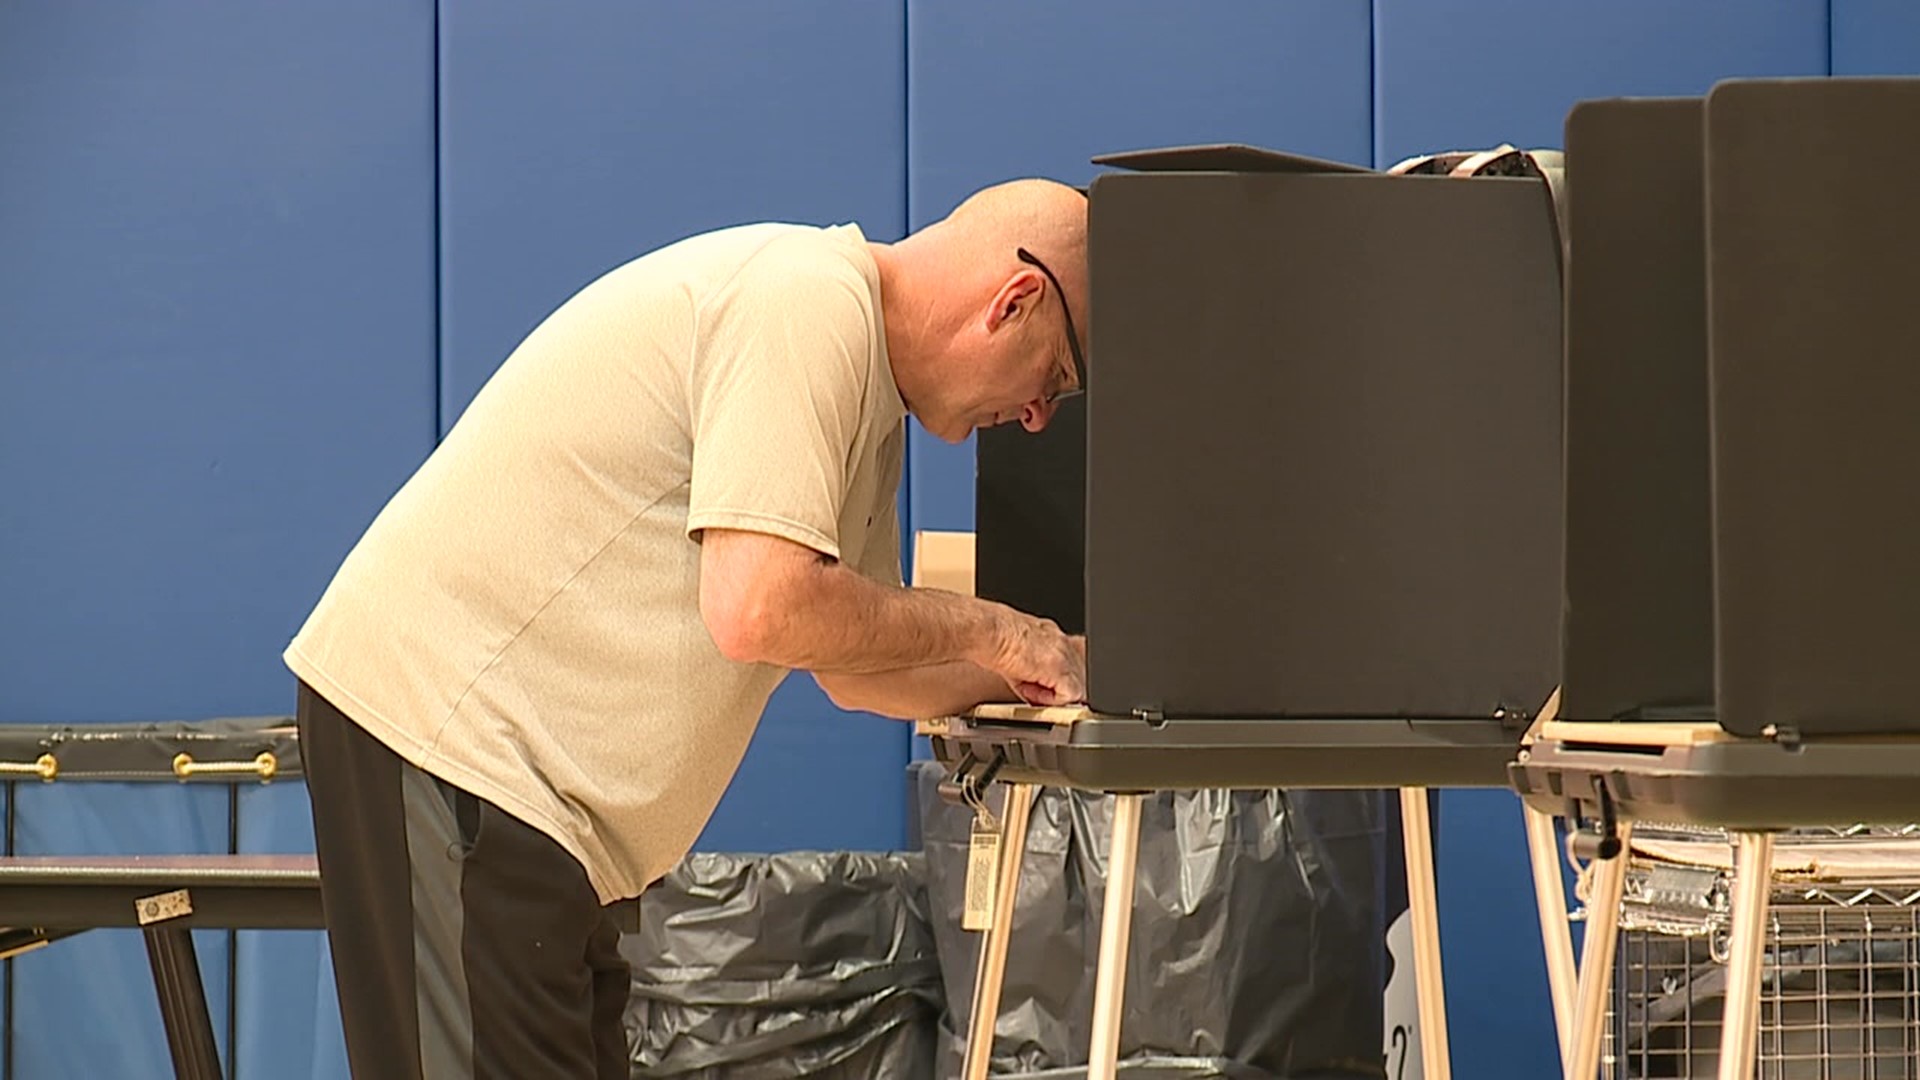 Ten polling places have been temporarily or permanently moved ahead of the November 7 general election. Newswatch 16's Courtney Harrison breaks down the changes.